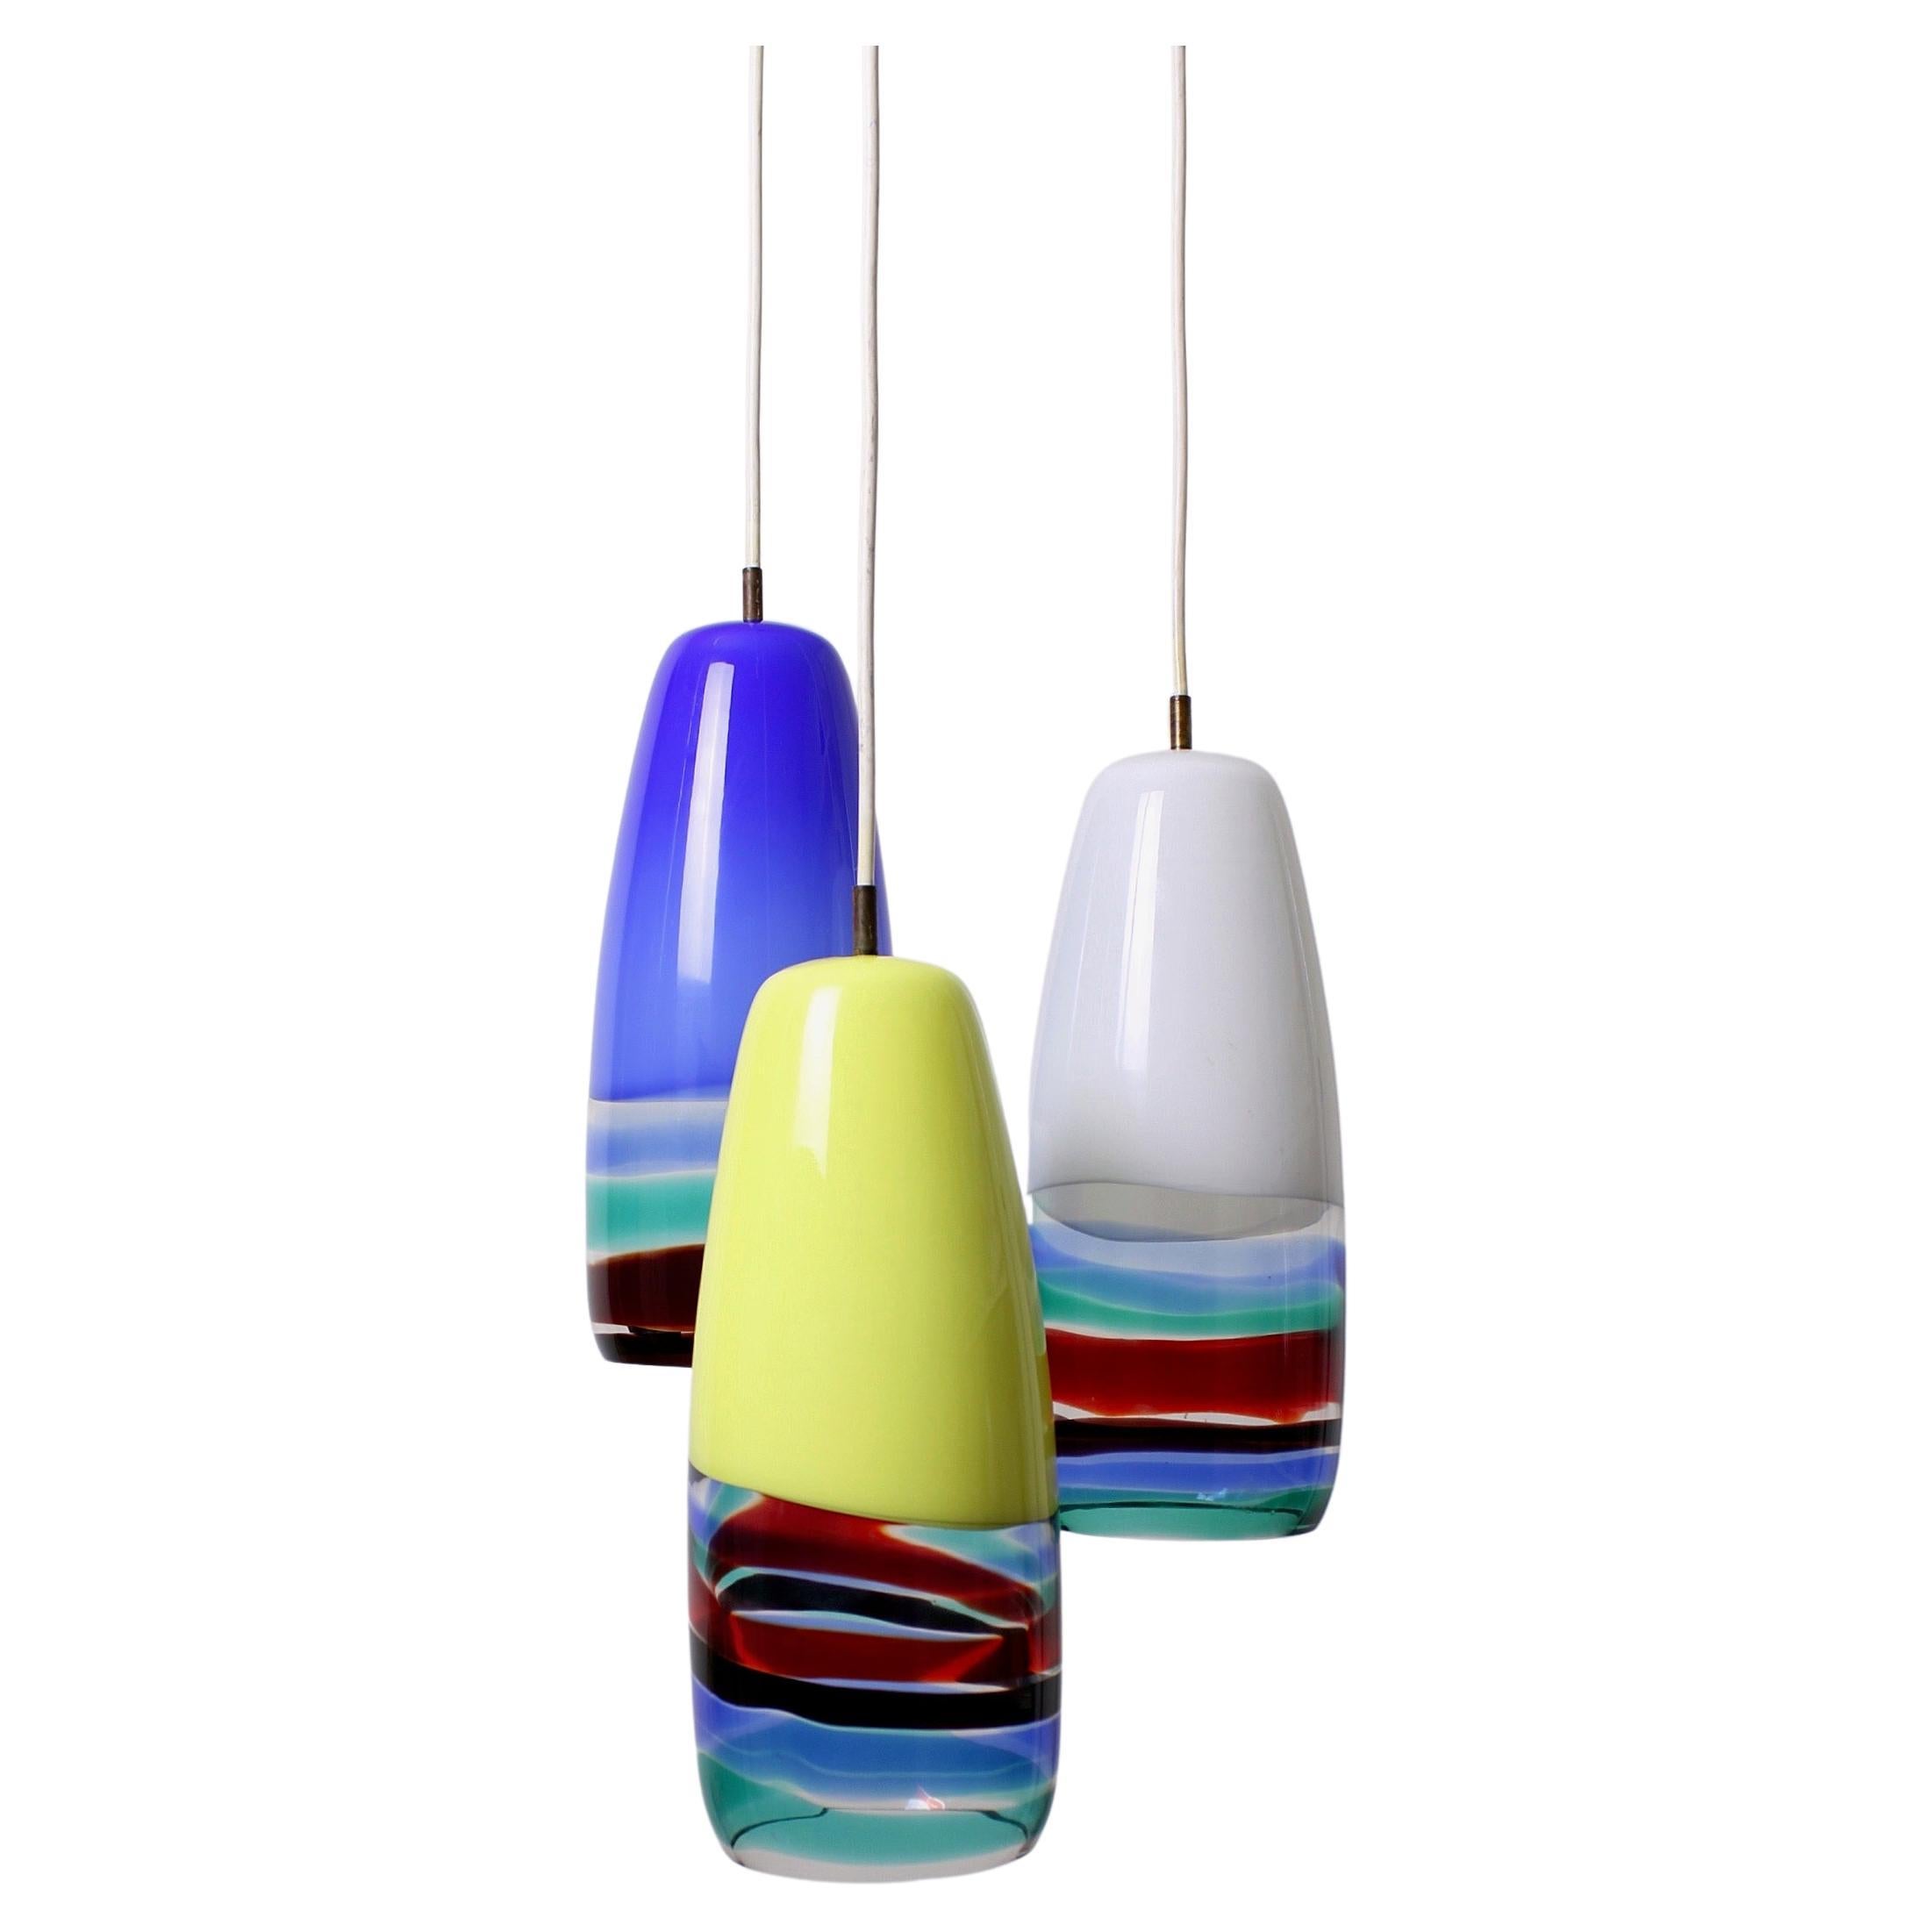 Set of Sigaro pendant lamps by Massimo Vignelli for Venini, 1956 For Sale